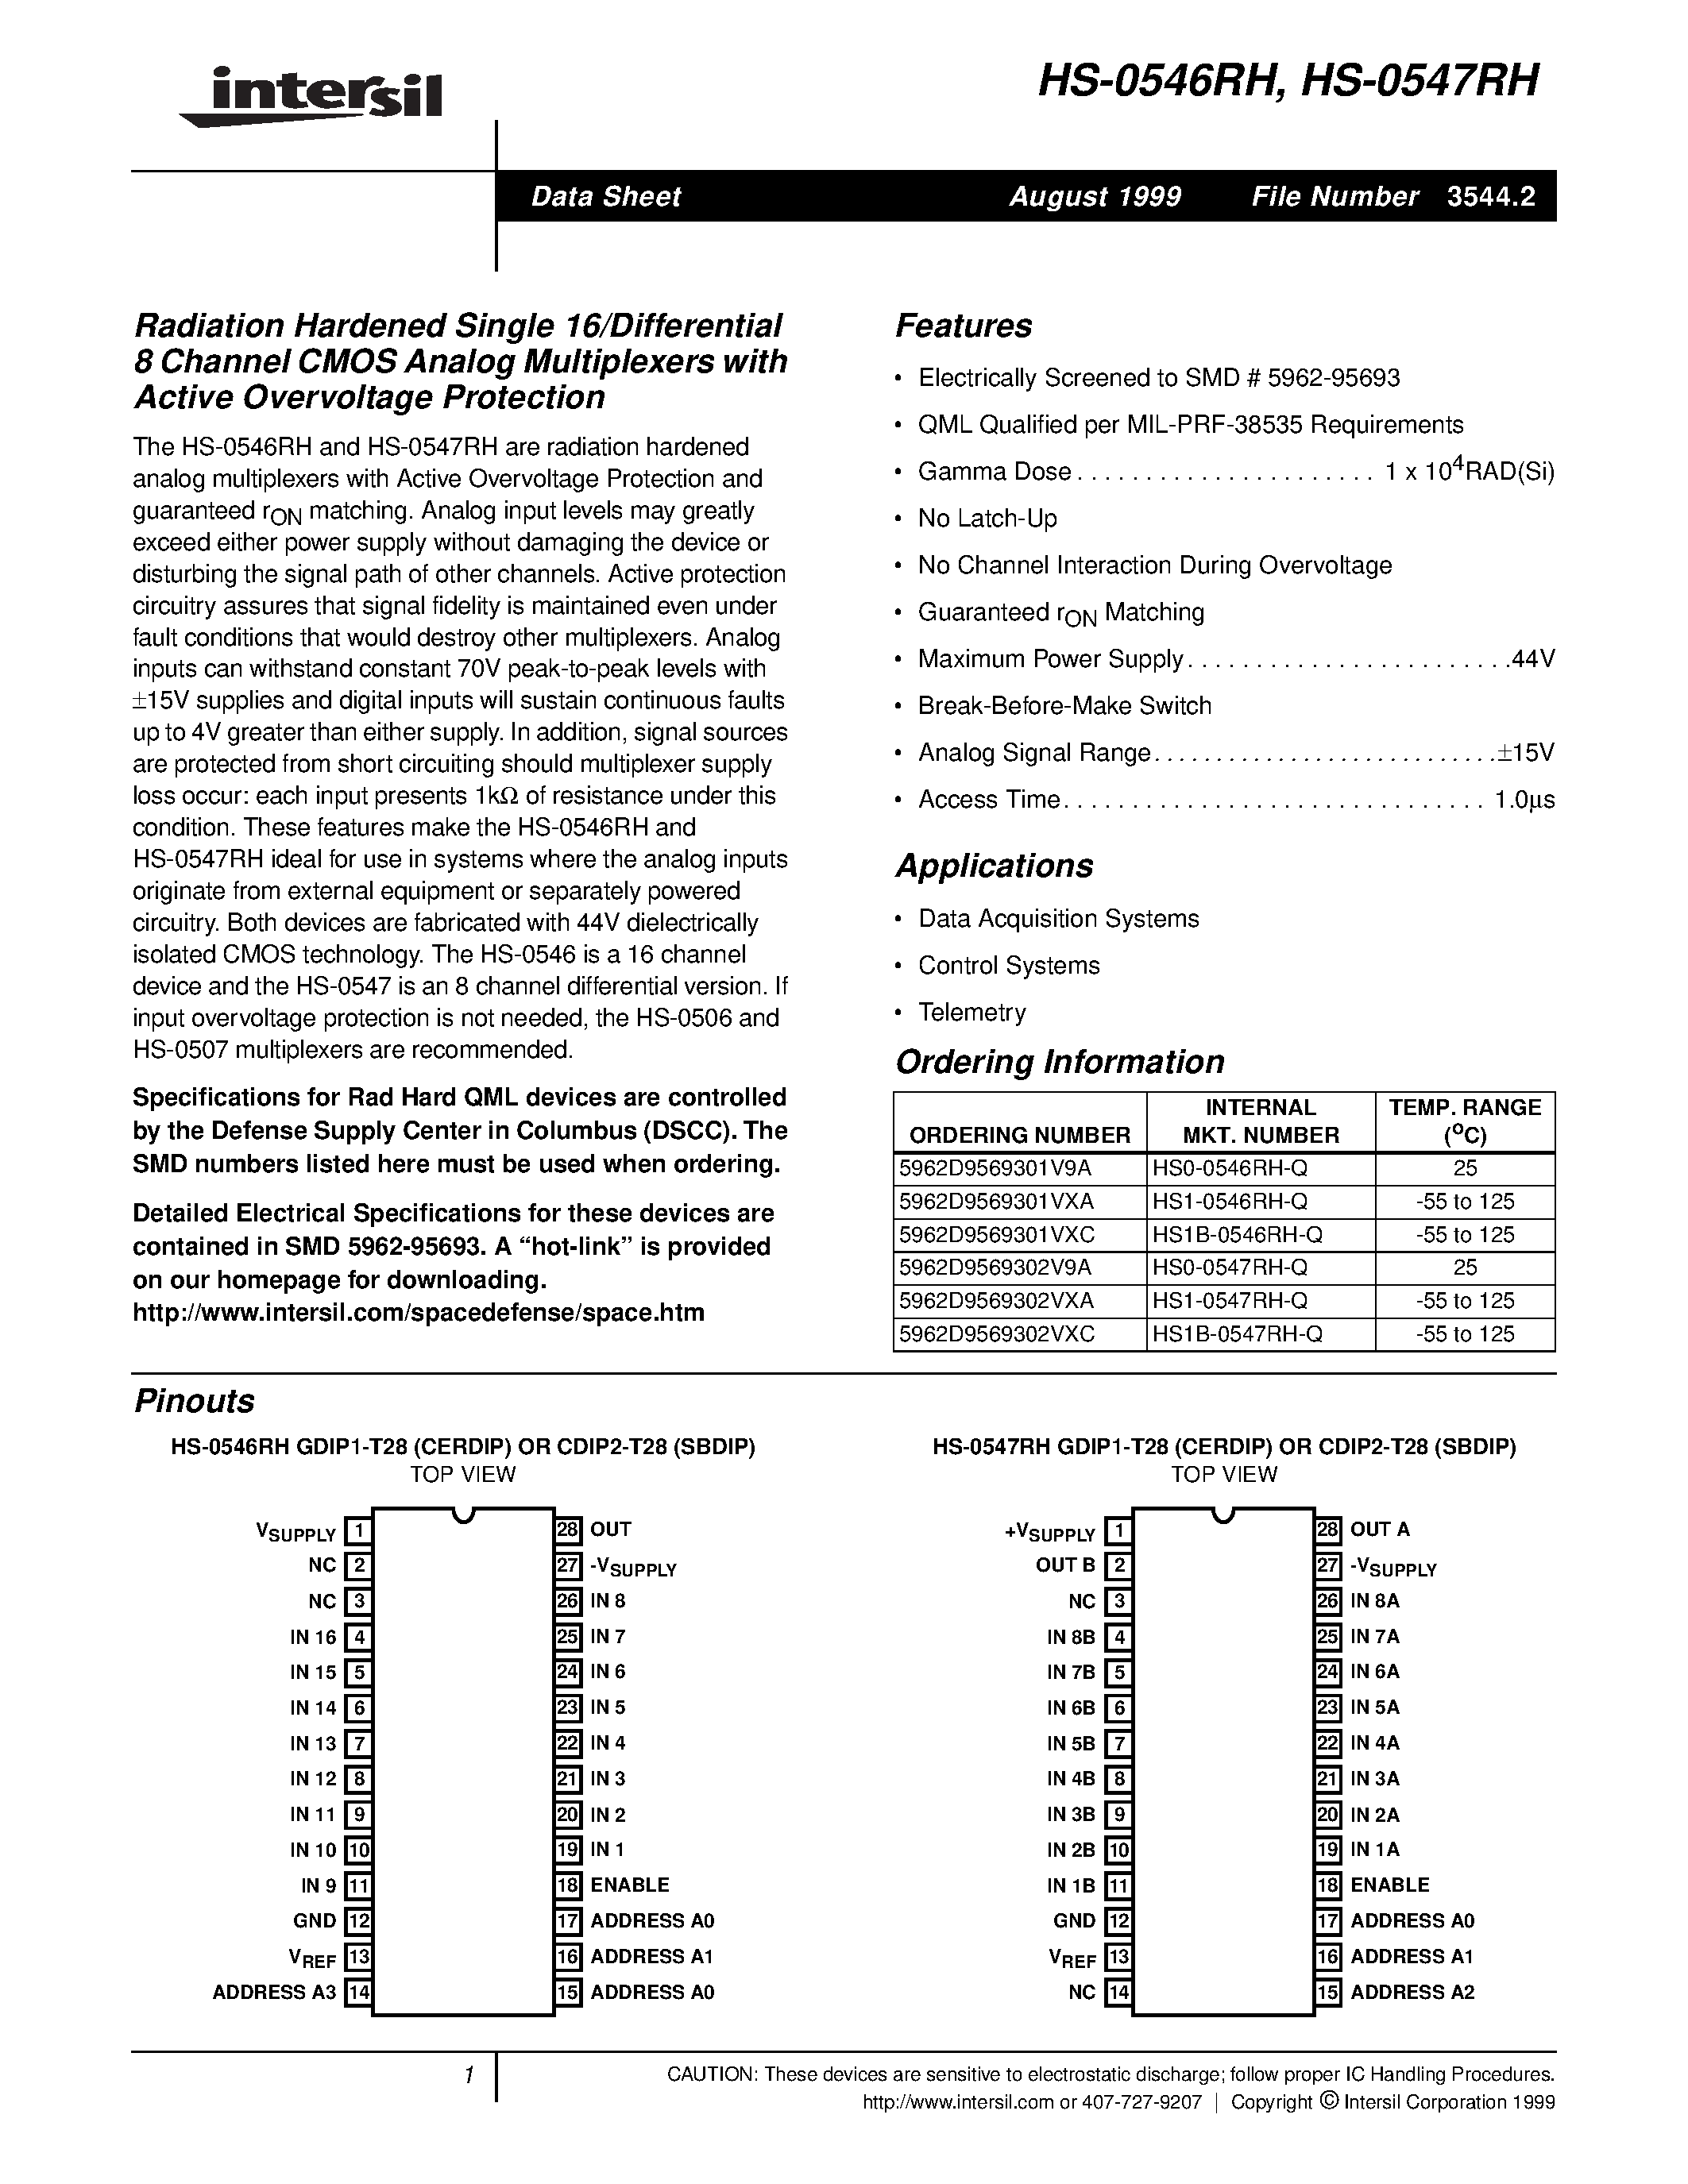 Datasheet HS1-0546RH-Q - Radiation Hardened Single 16/Differential 8 Channel CMOS Analog Multiplexers with Active Overvoltage Protection page 1